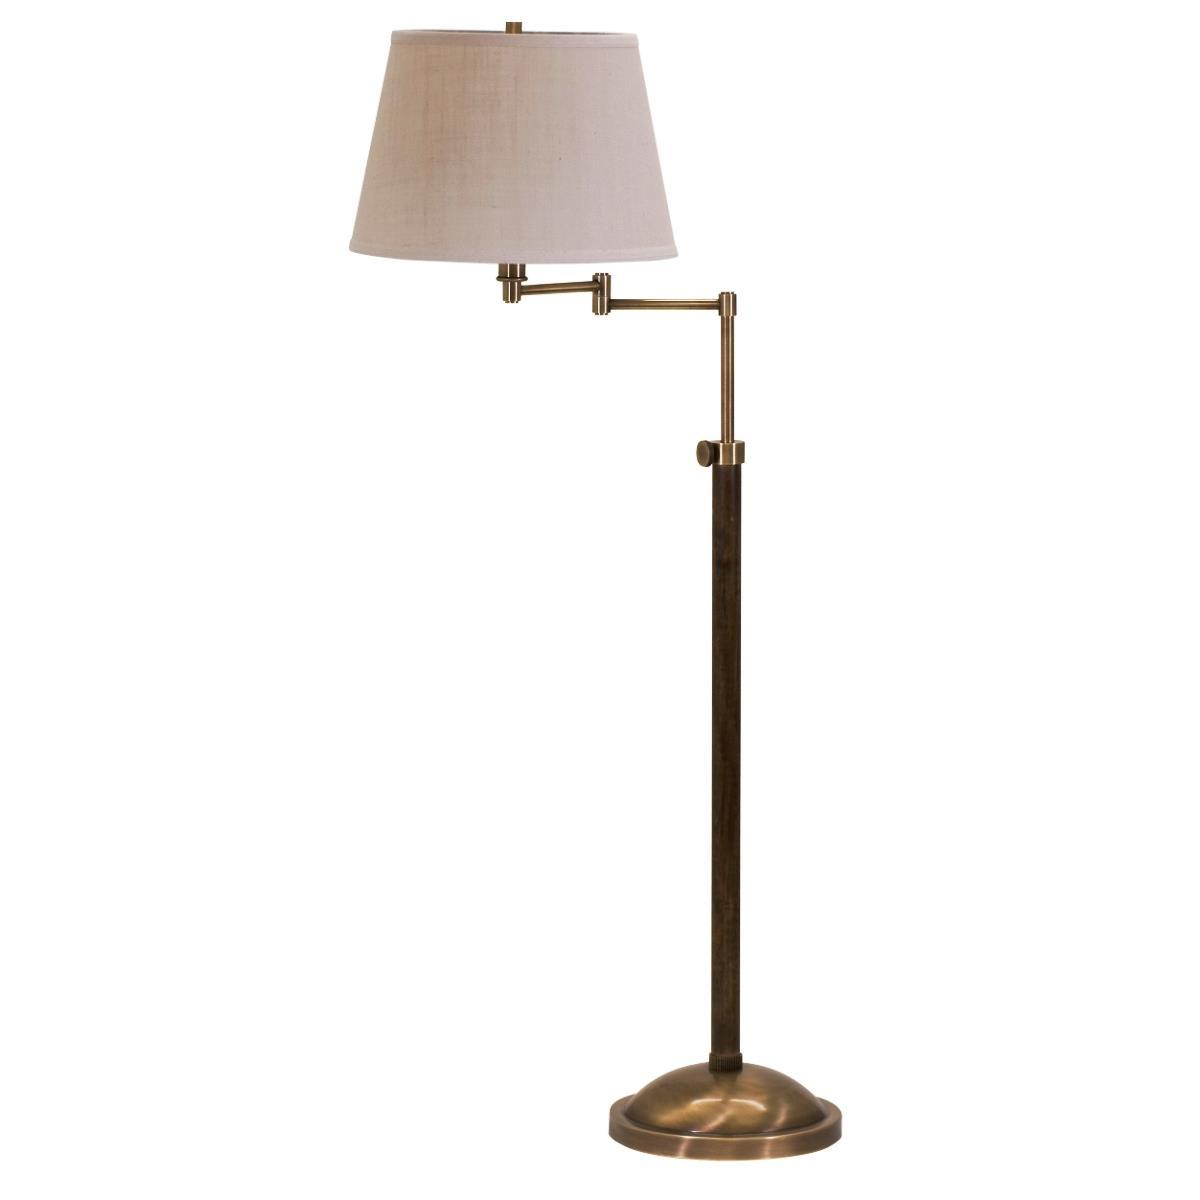 House Of Troy Richmond Collection R401 Ab Swing Arm Floor Lamp 11 Base 15 Wide Shade X 515 62 Maximum Overall Height X 12 Arm Extension throughout size 1200 X 1200